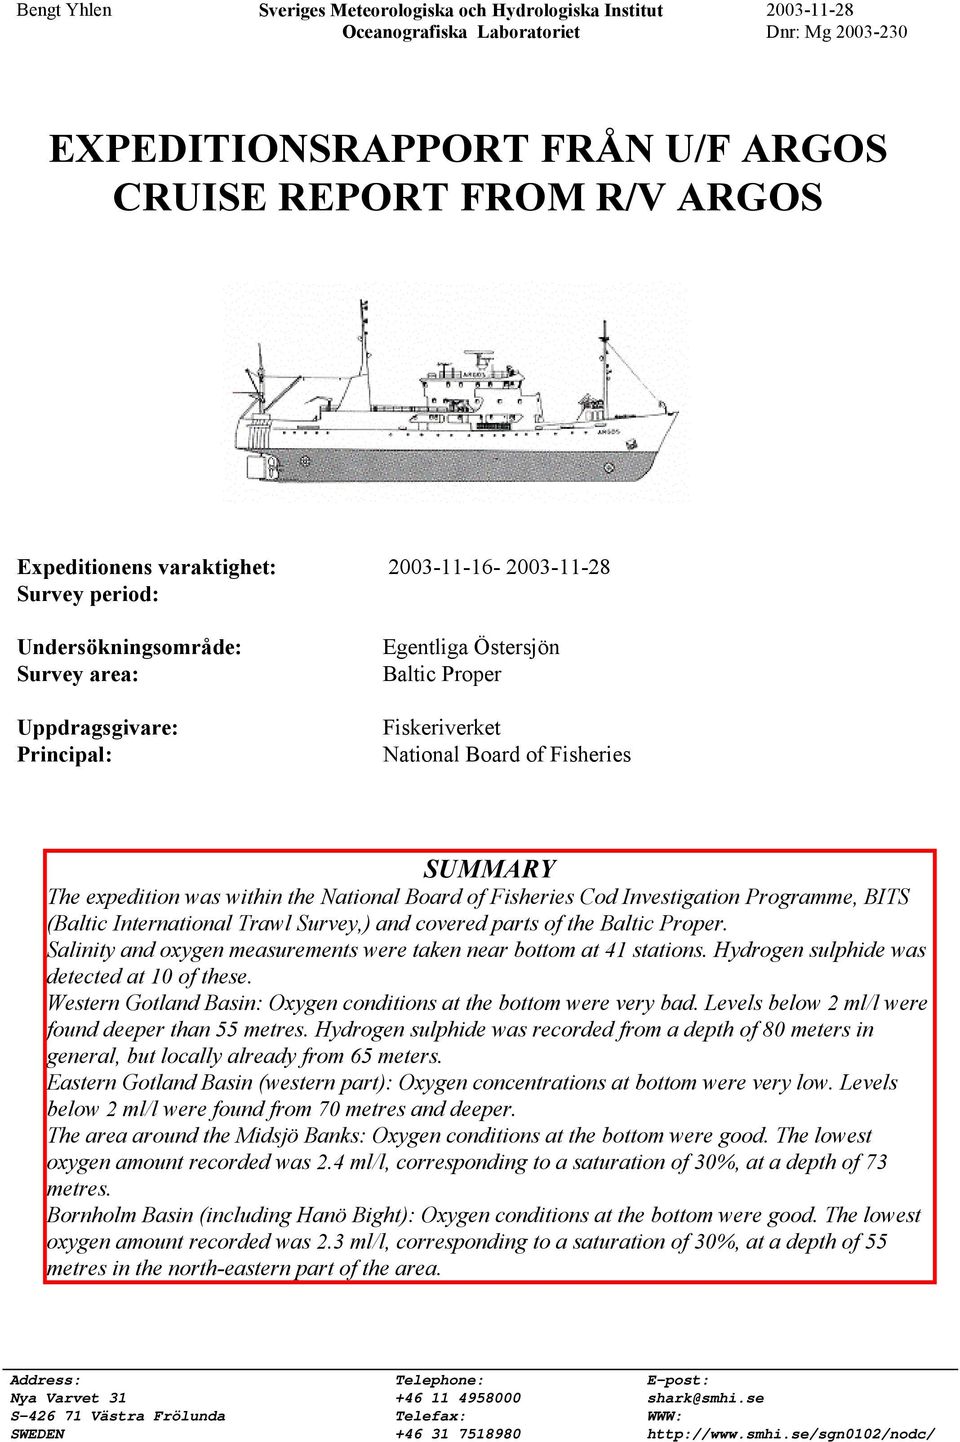 expedition was within the National Board of Fisheries Cod Investigation Programme, BITS (Baltic International Trawl Survey,) and covered parts of the Baltic Proper.